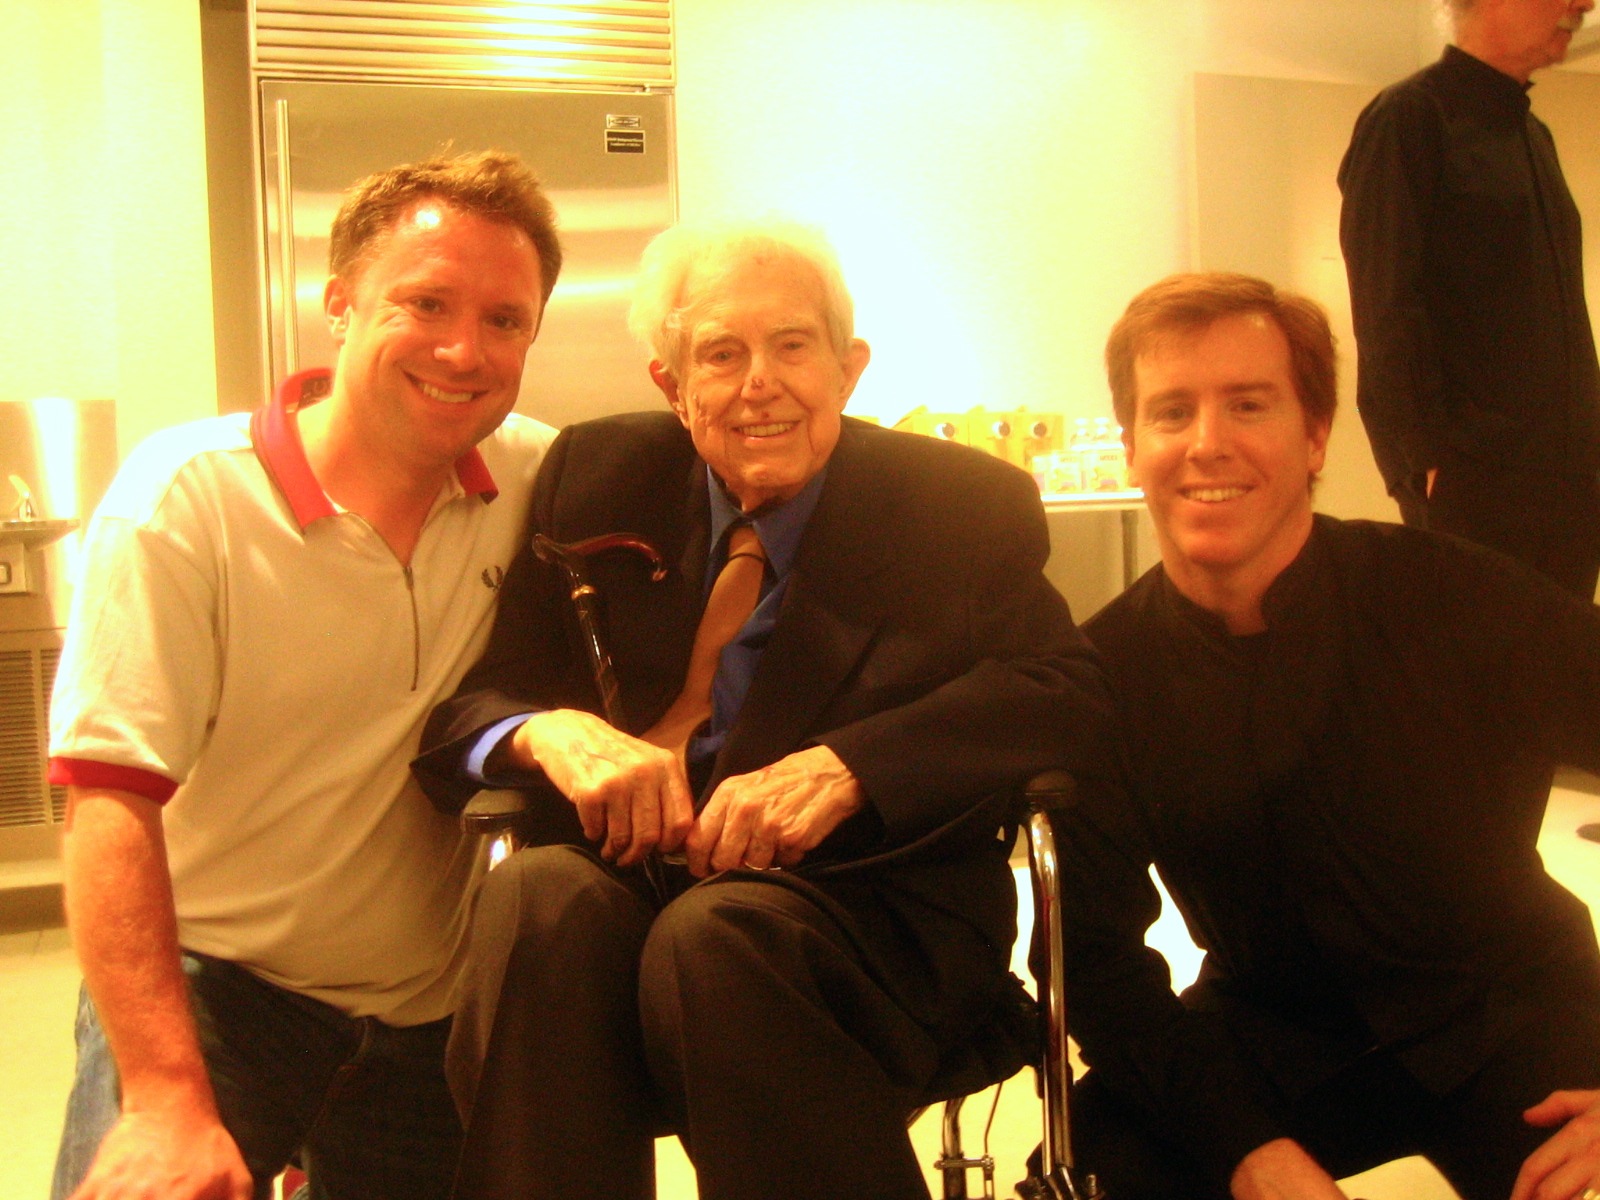 With Elliott Carter and Eric Huebner at the World Premiere of 'Two Controversies and a Conversation' in New York City in June 2012.